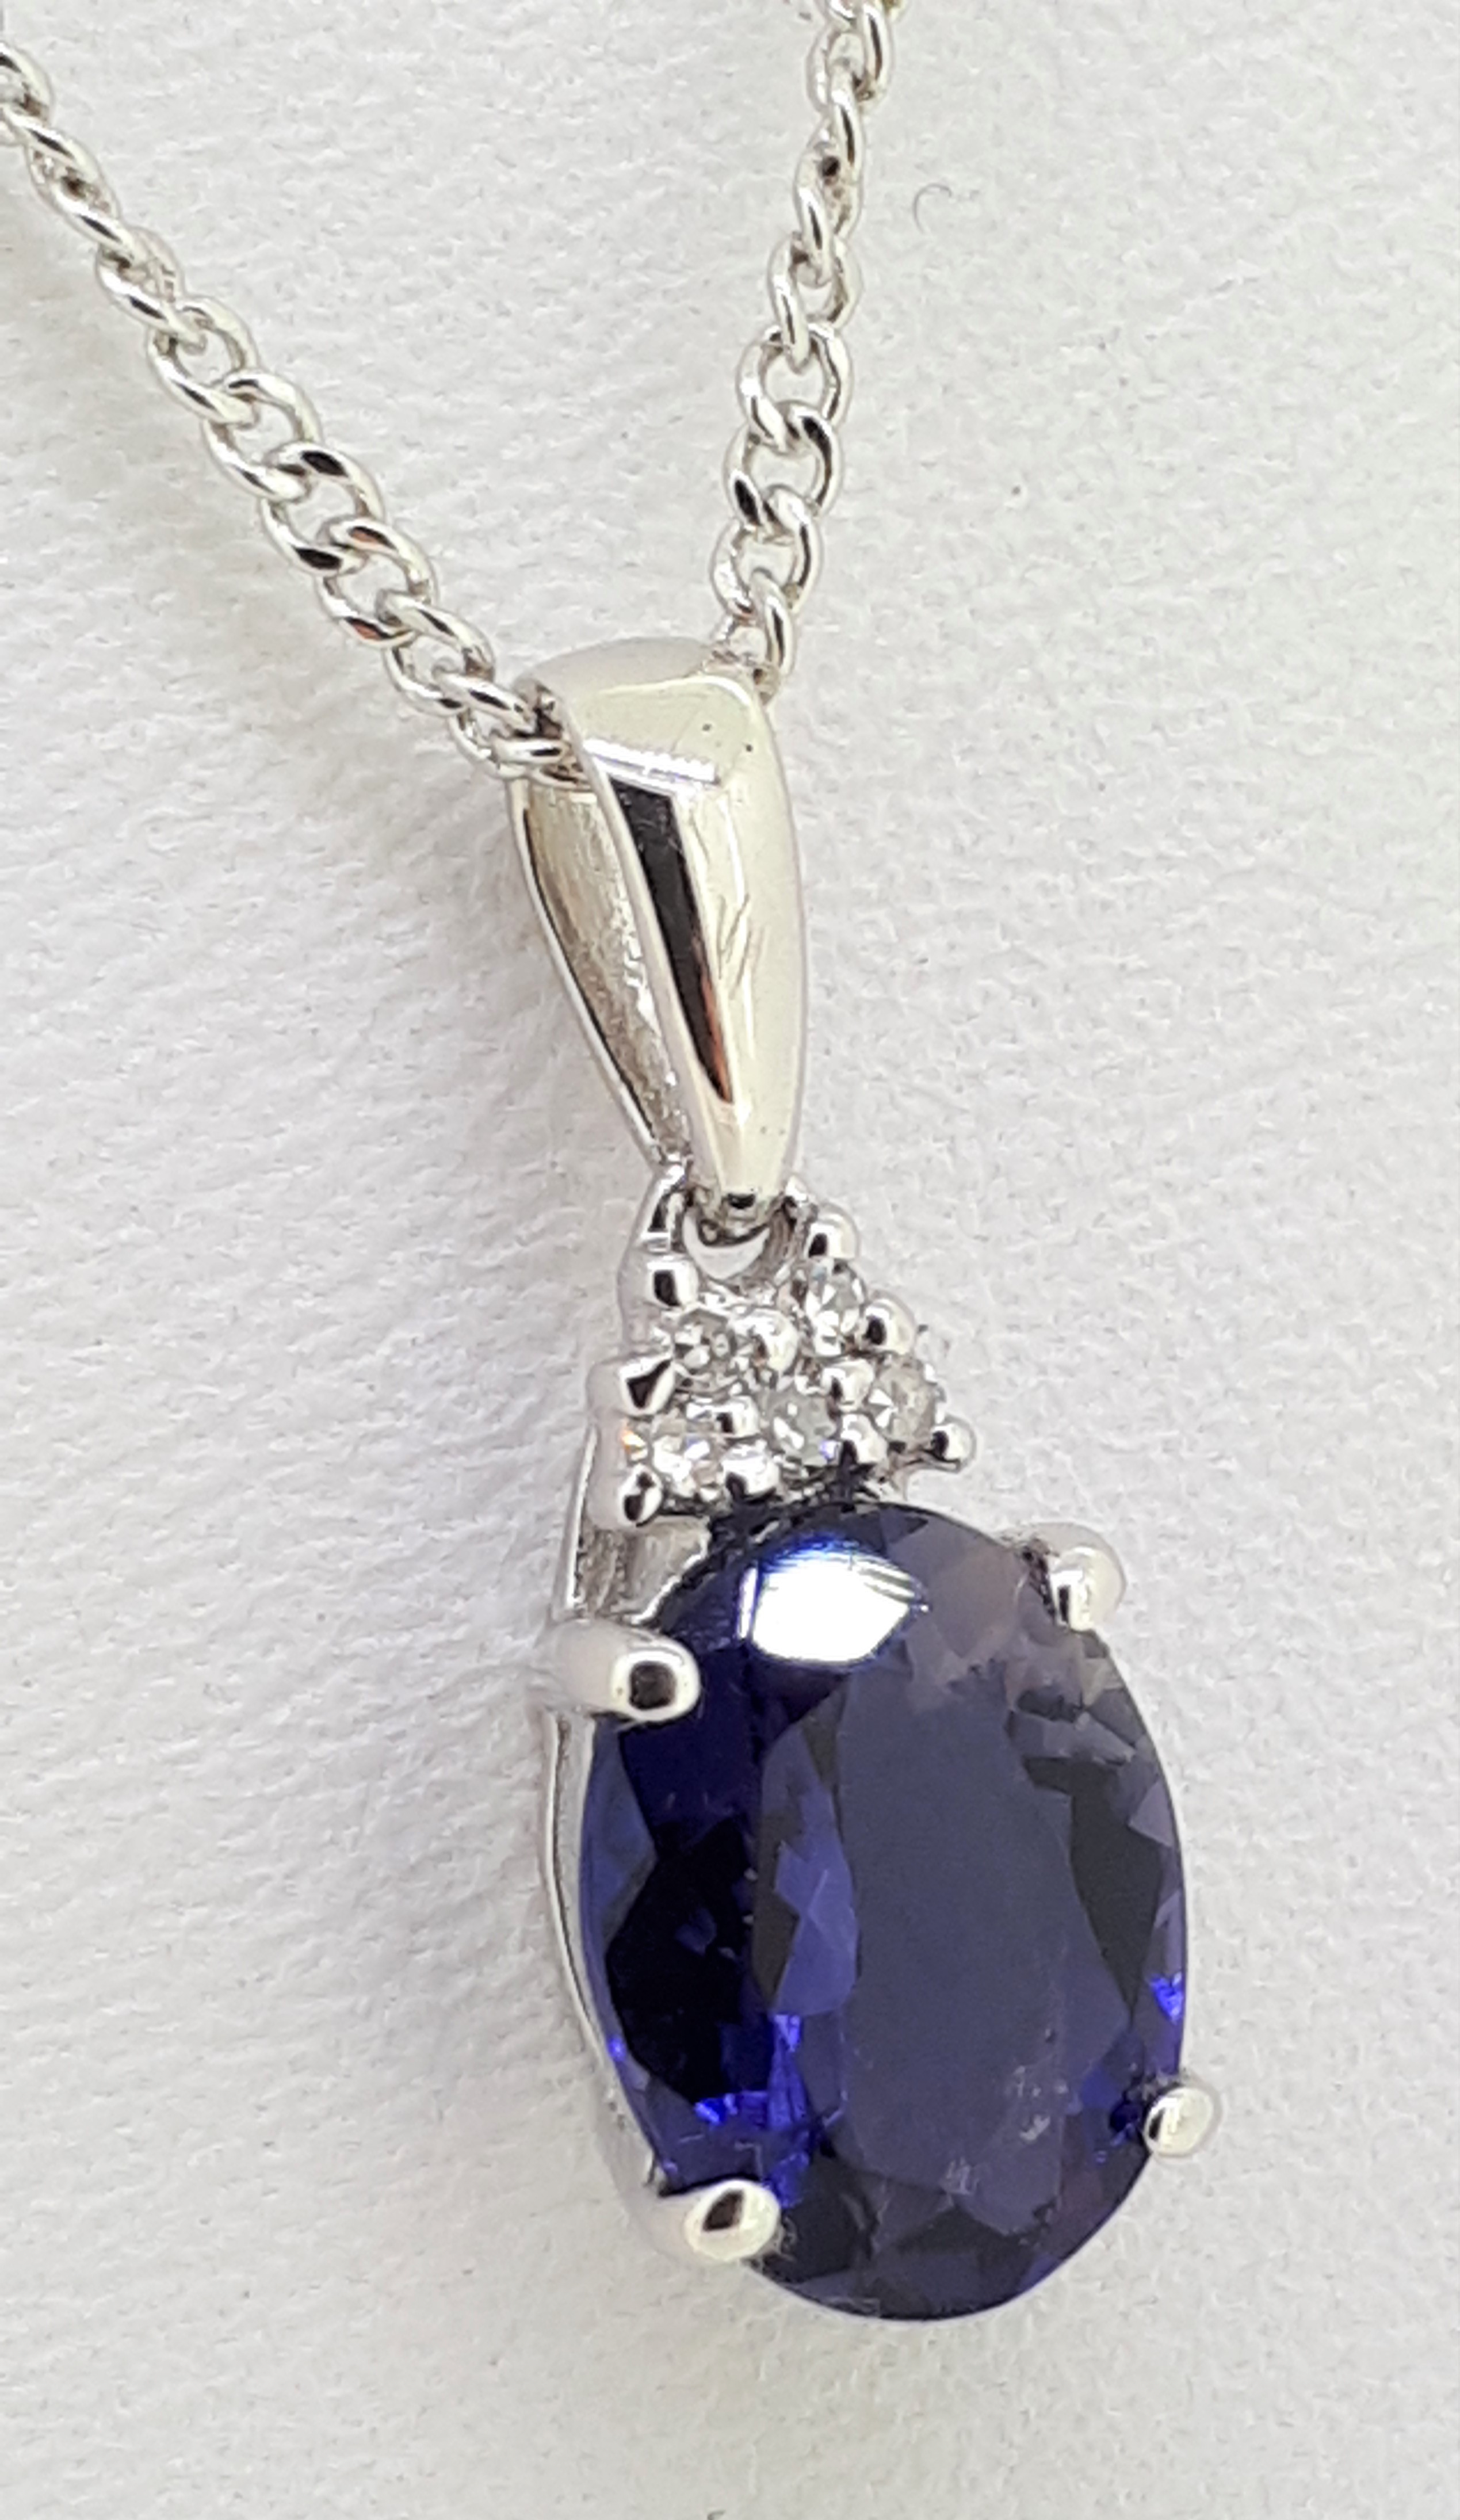 9ct (375) White Gold Diamond & Iolite Pendant on a Twisted Curb Chain - Image 4 of 5